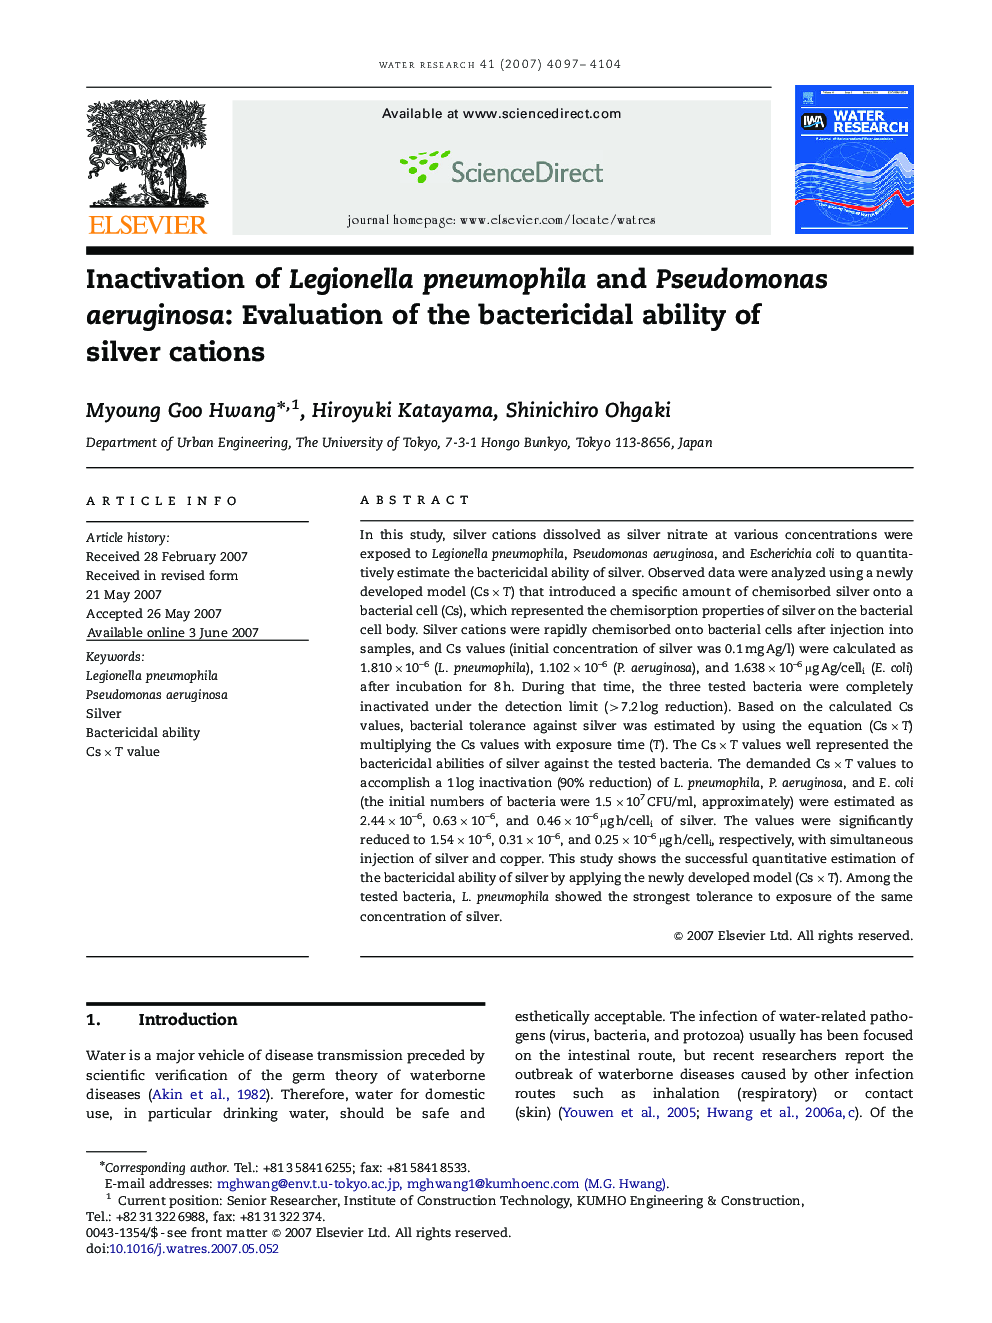 Inactivation of Legionella pneumophila and Pseudomonas aeruginosa: Evaluation of the bactericidal ability of silver cations